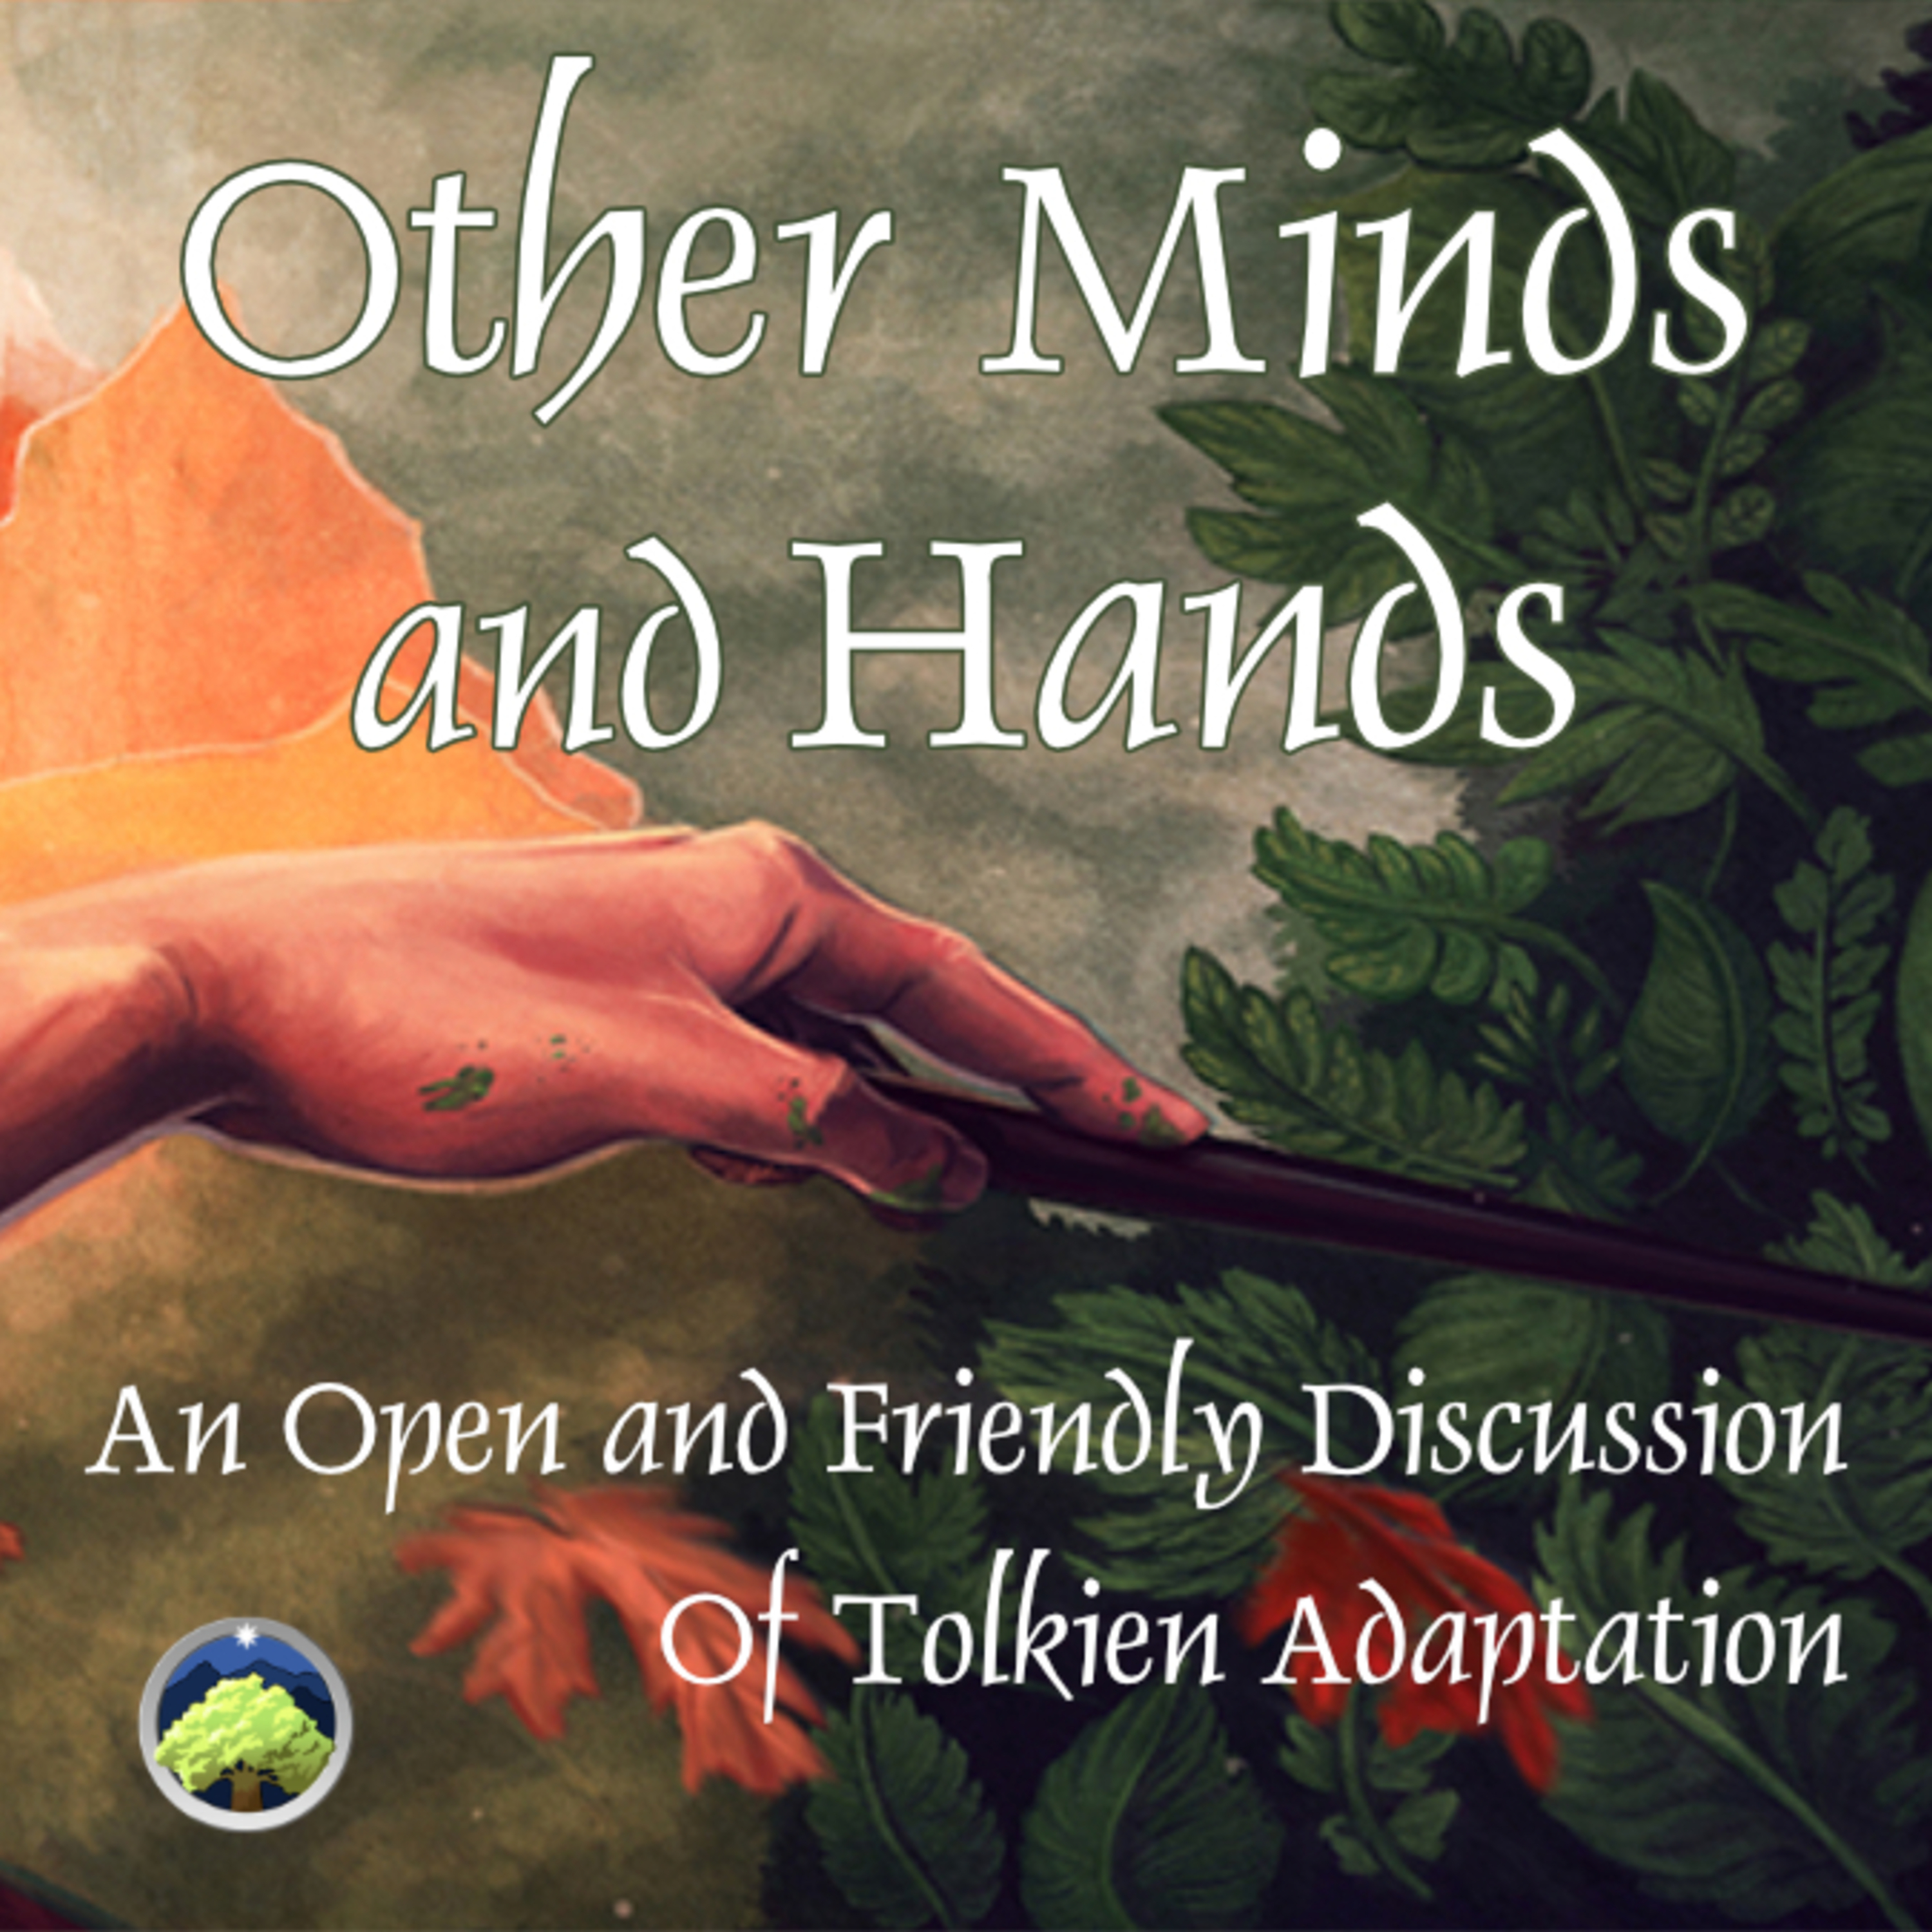 545: Other Minds and Hands, Episode 55